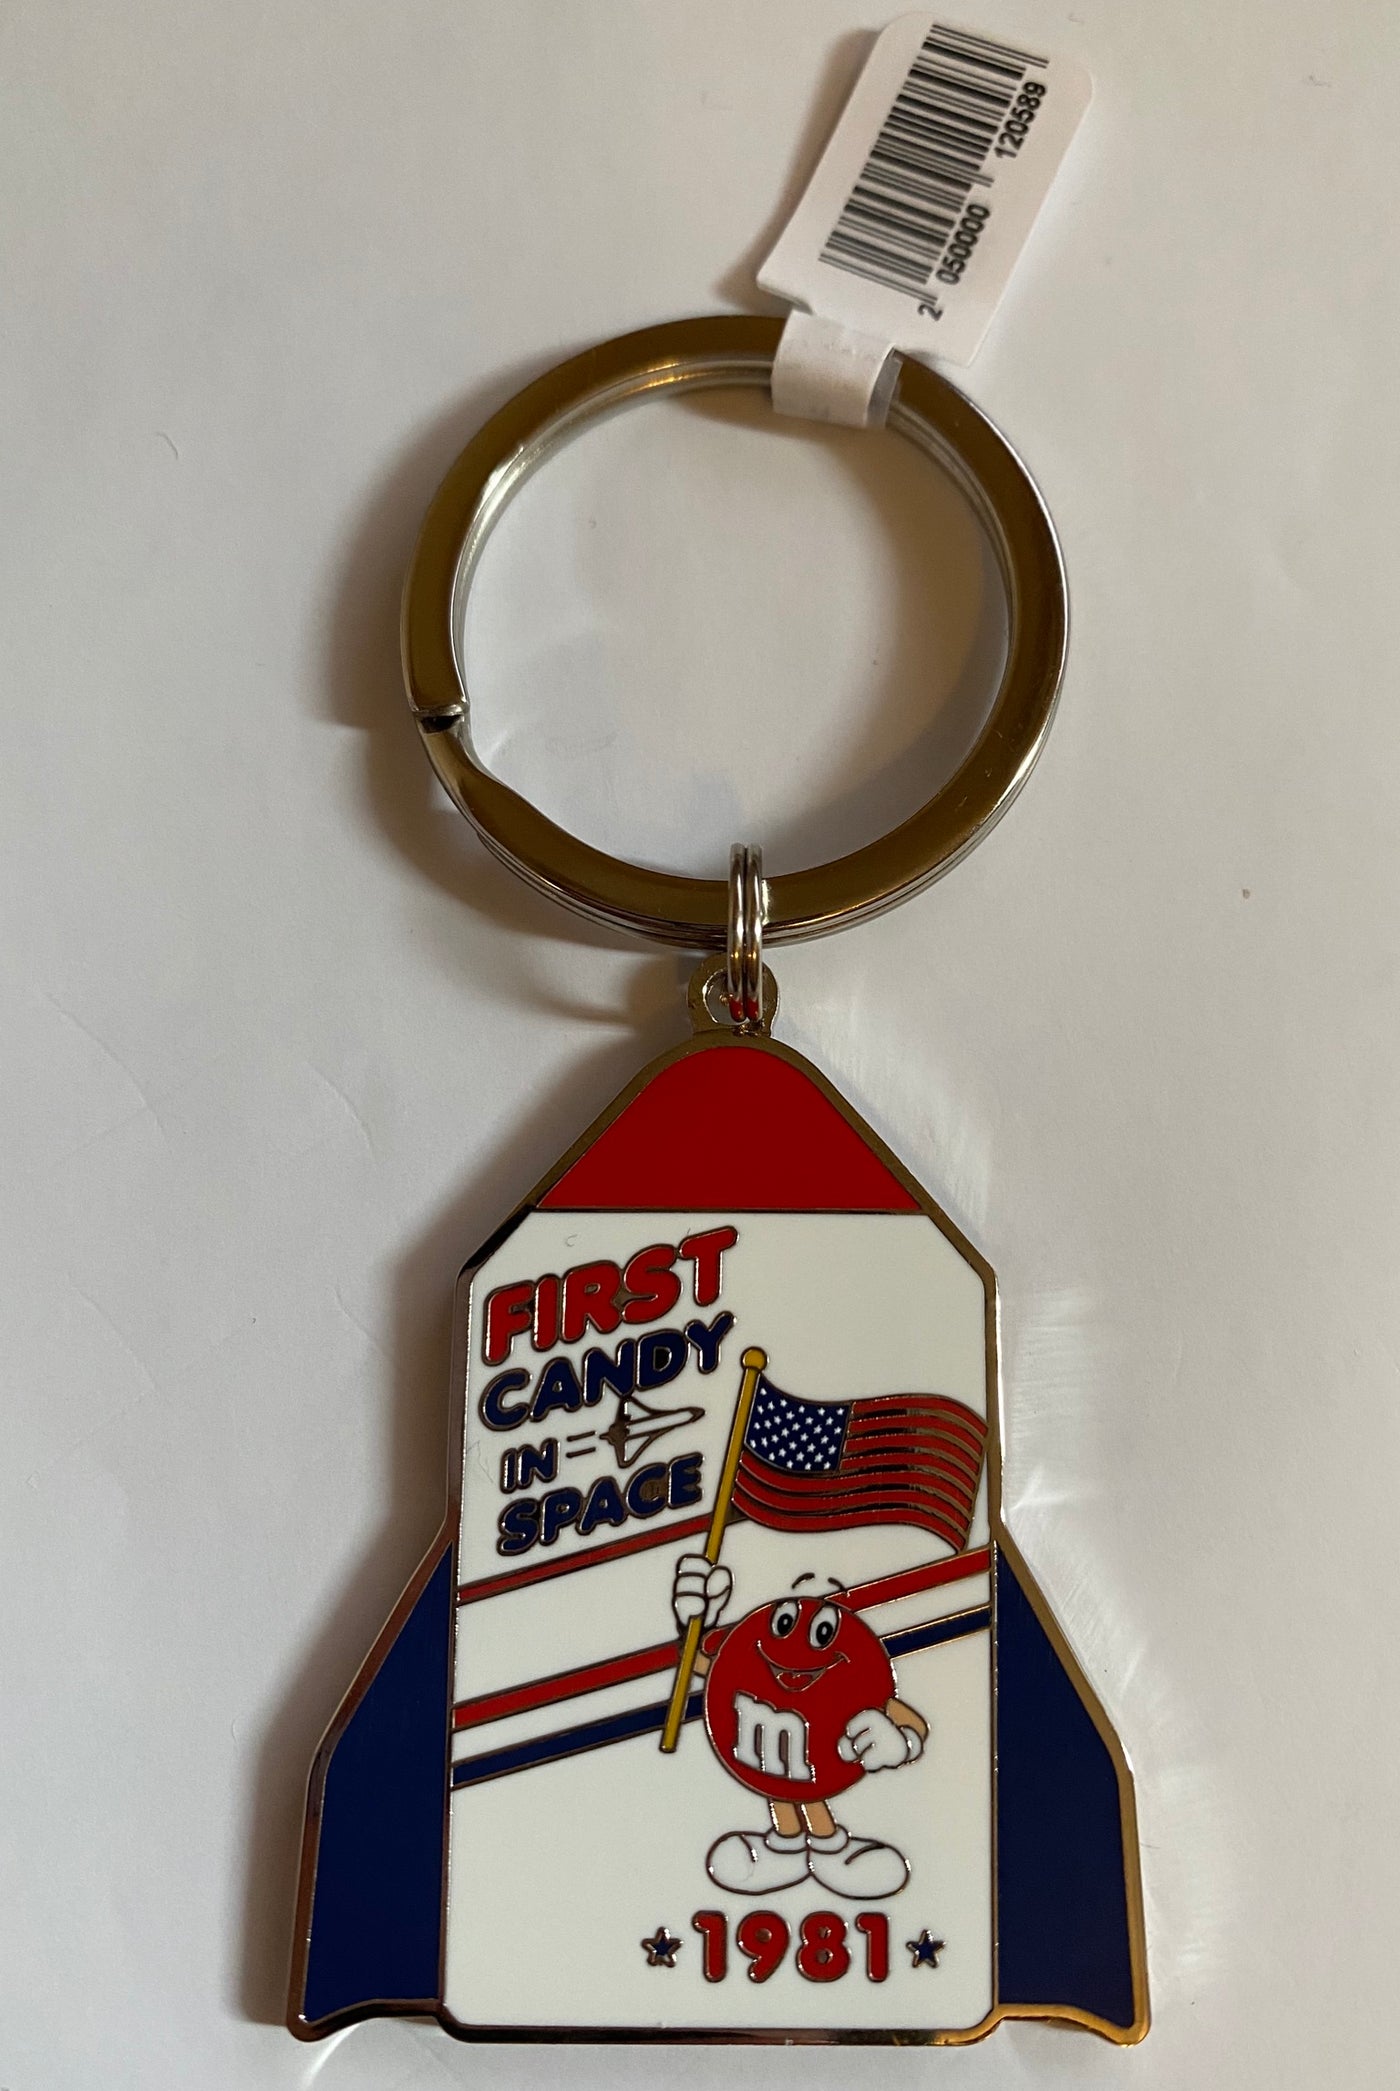 M&M's World Red Character First Candy in Space 1981 Rocket Metal Keychain New